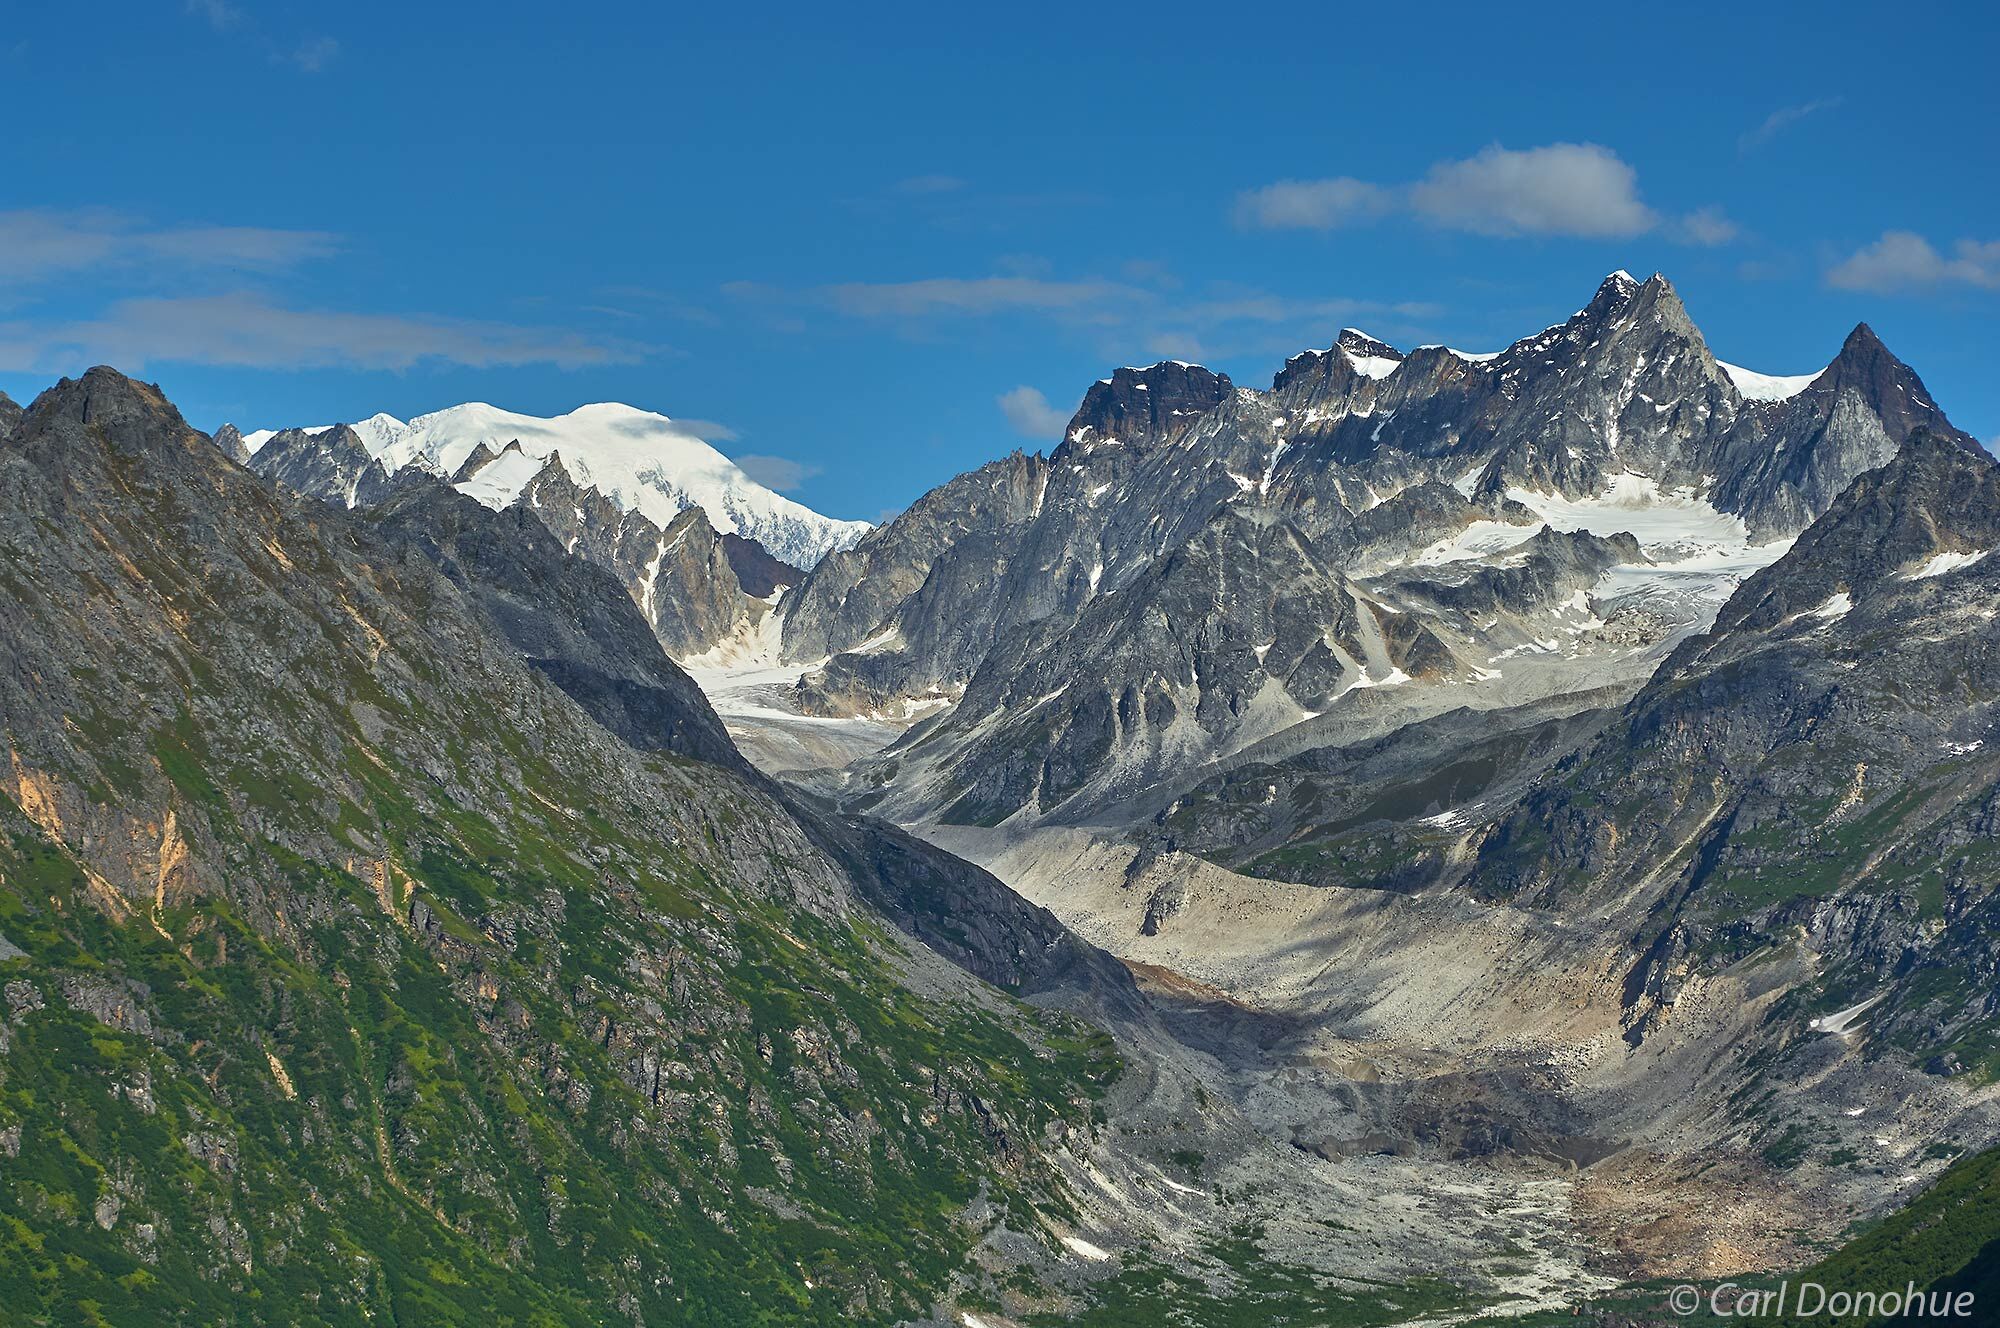 View of Mount Denali and the Alaska Range from the more rugged southside of Denali National Park and Preserve.